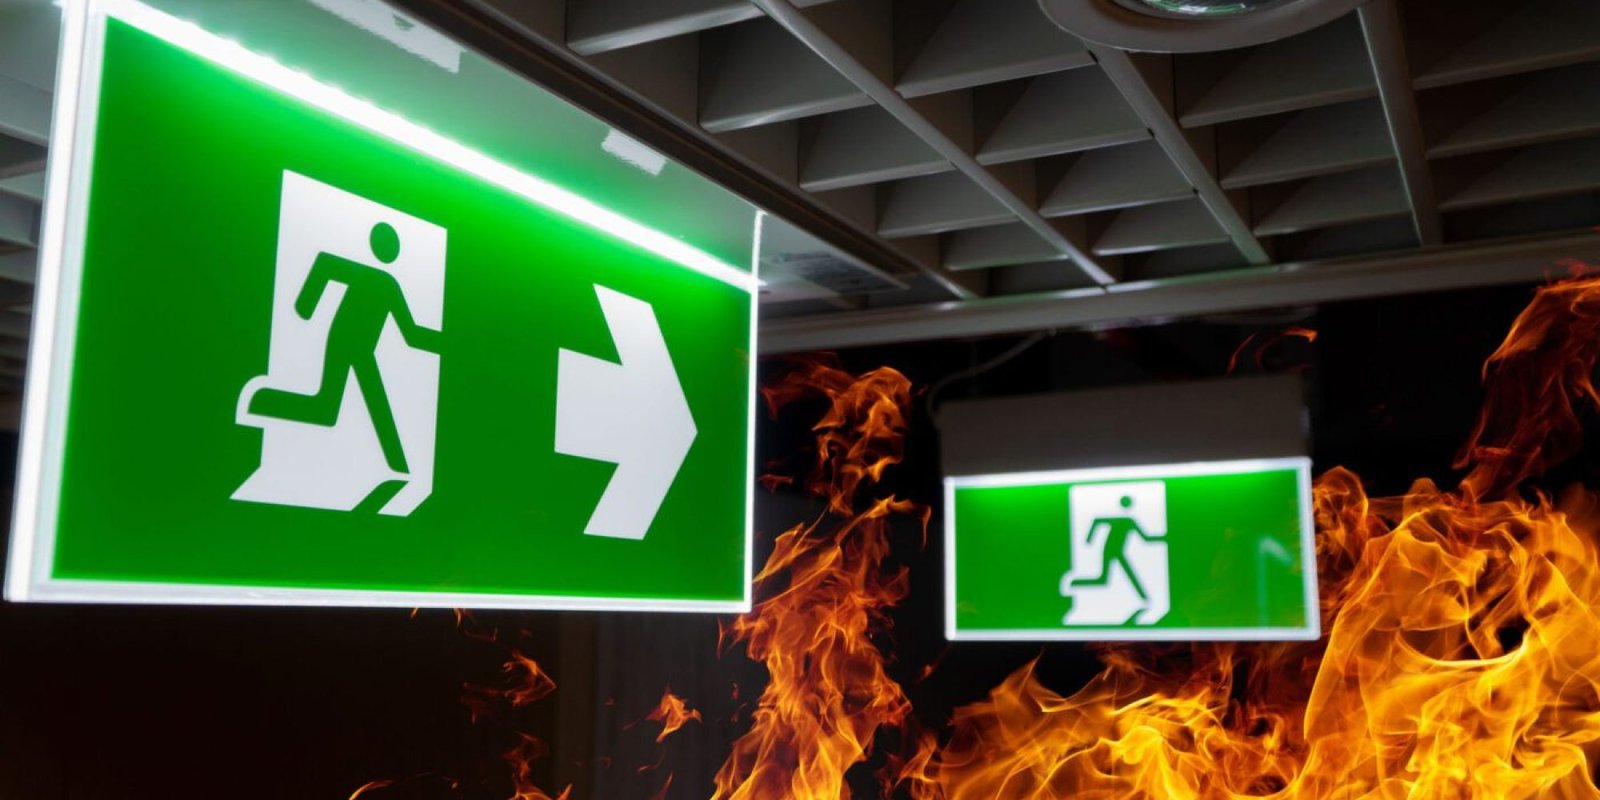 hot-flame-fire-green-fire-escape-sign-hang-ceiling-office-night